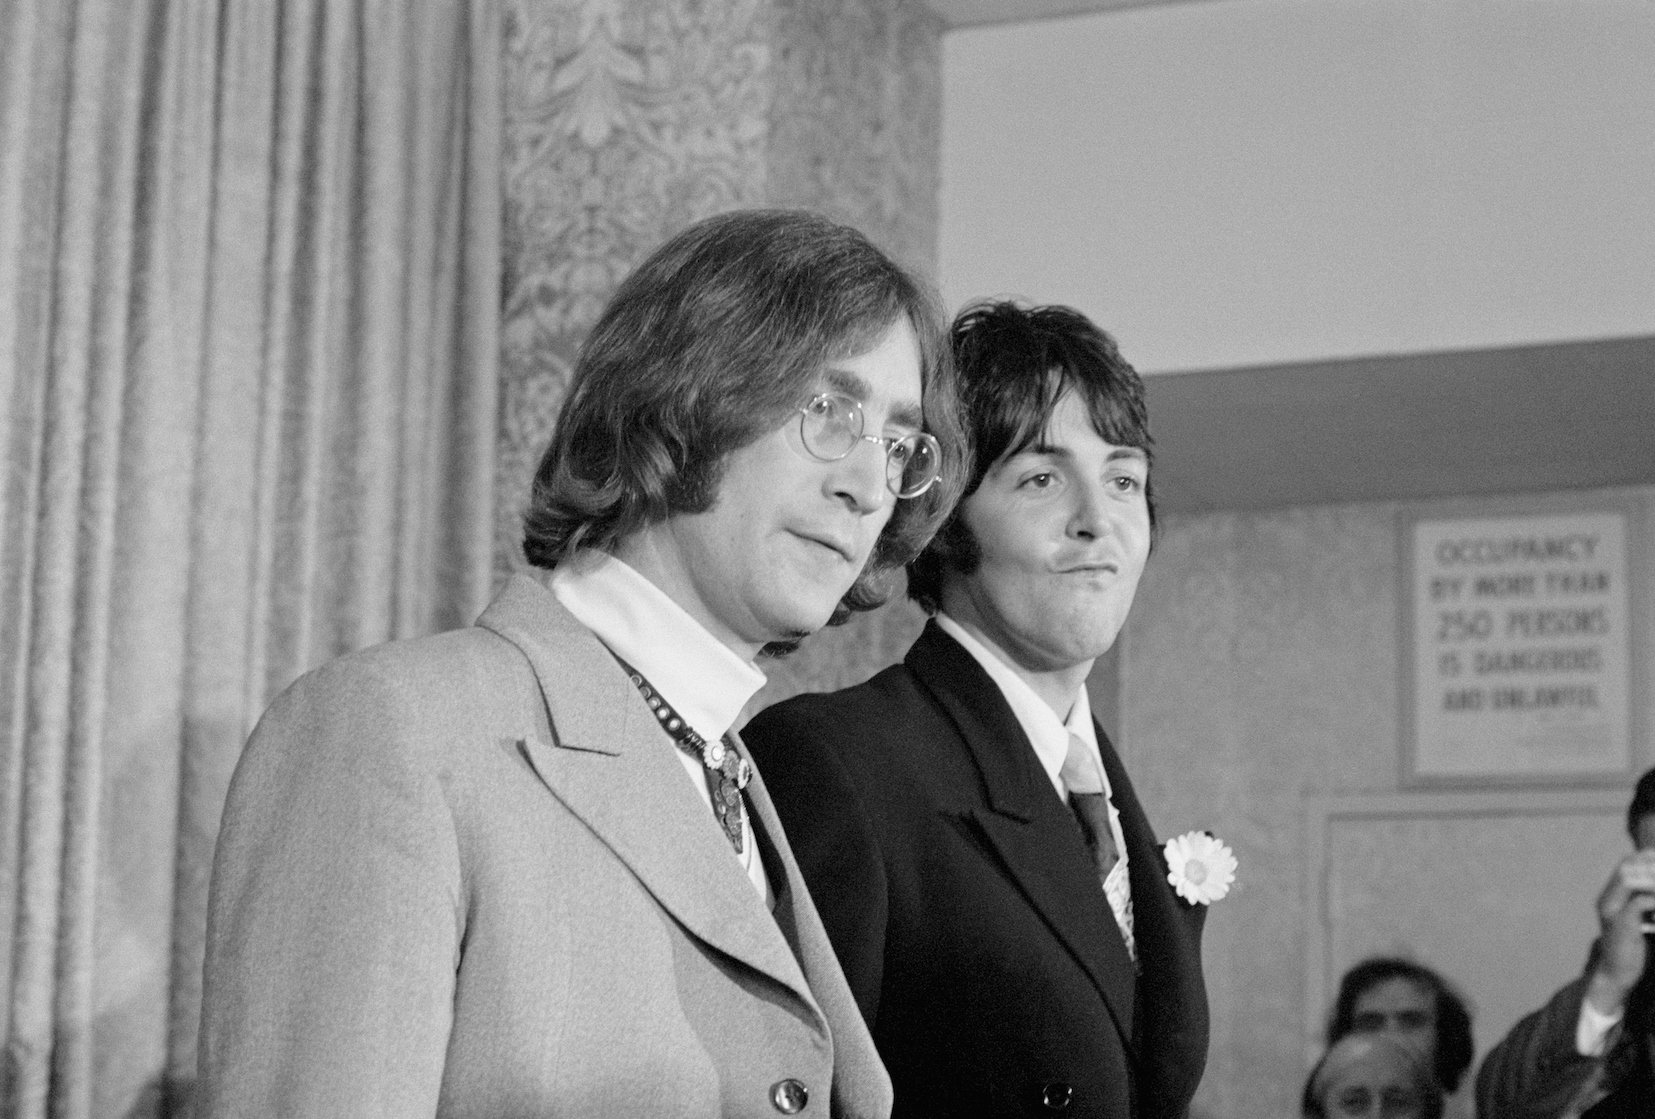 John Lennon and Paul McCartney attend a press conference announcing Apple Corps.